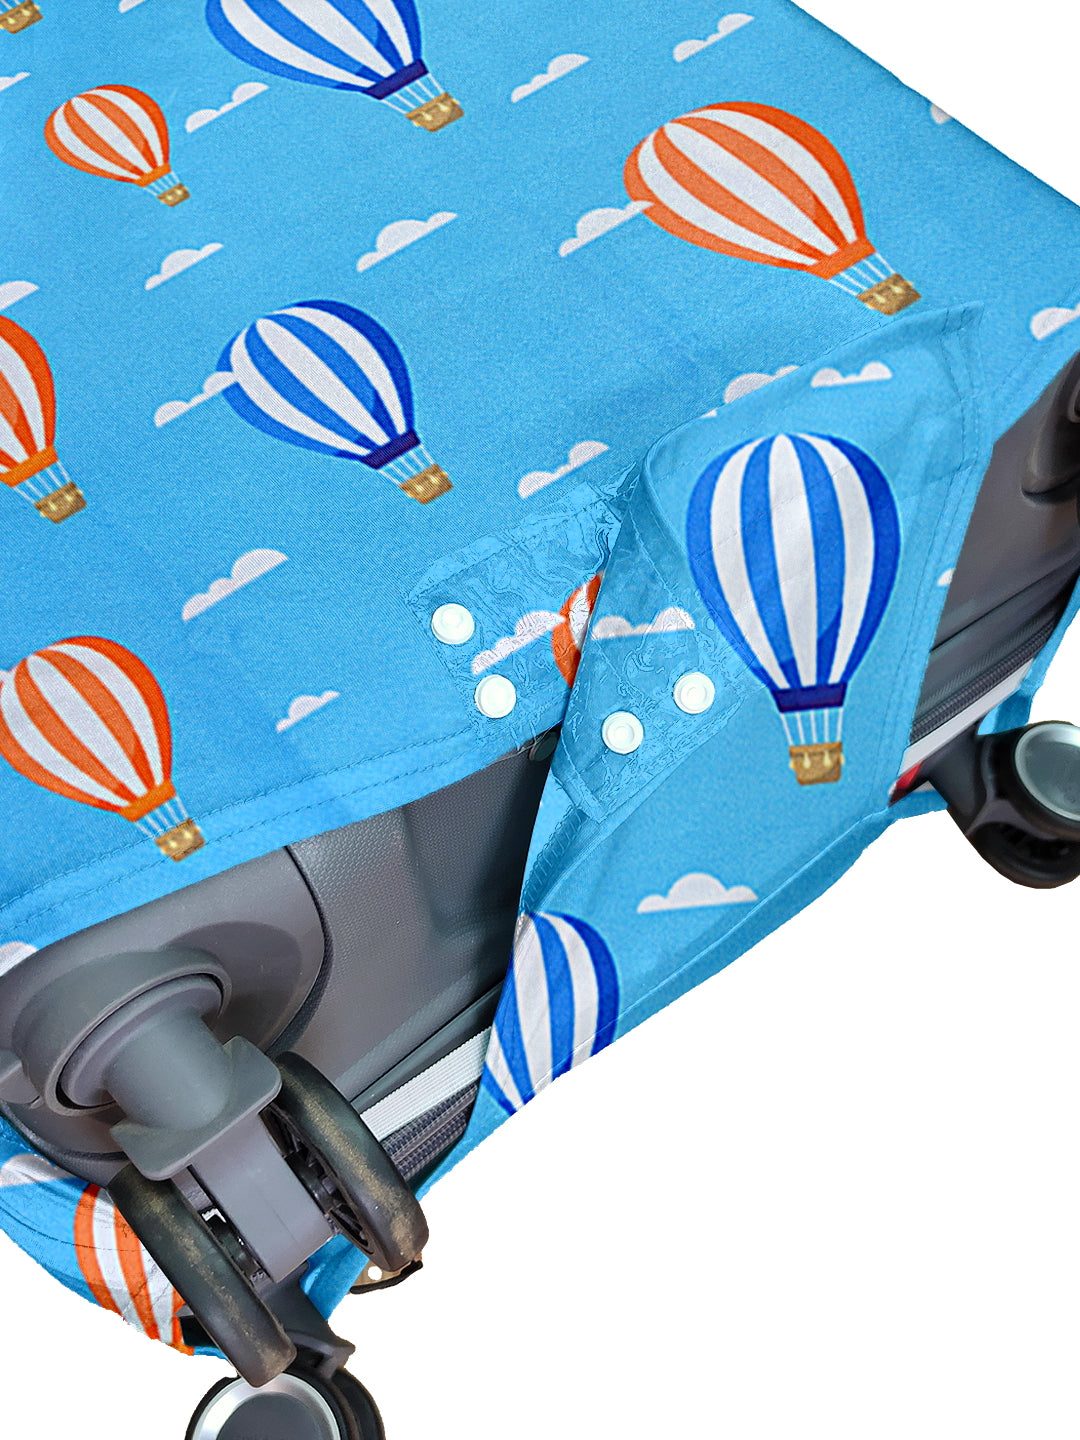 Stretchable Printed Protective Luggage Bag Cover Medium- Light Blue